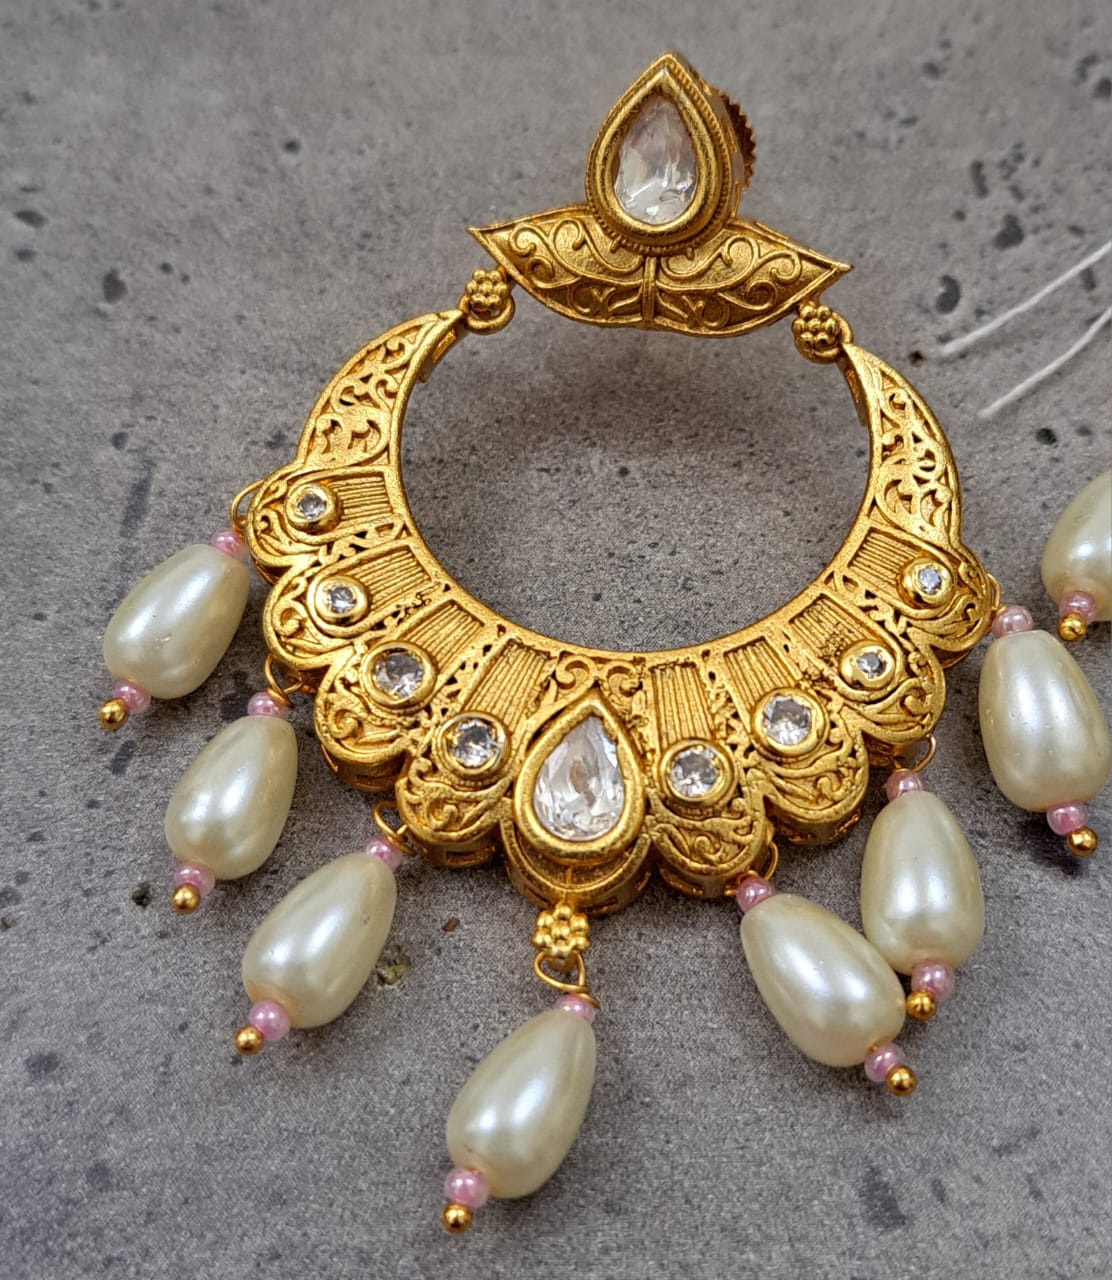 Antique kundan gold carving chand bali with pearls and pink beads